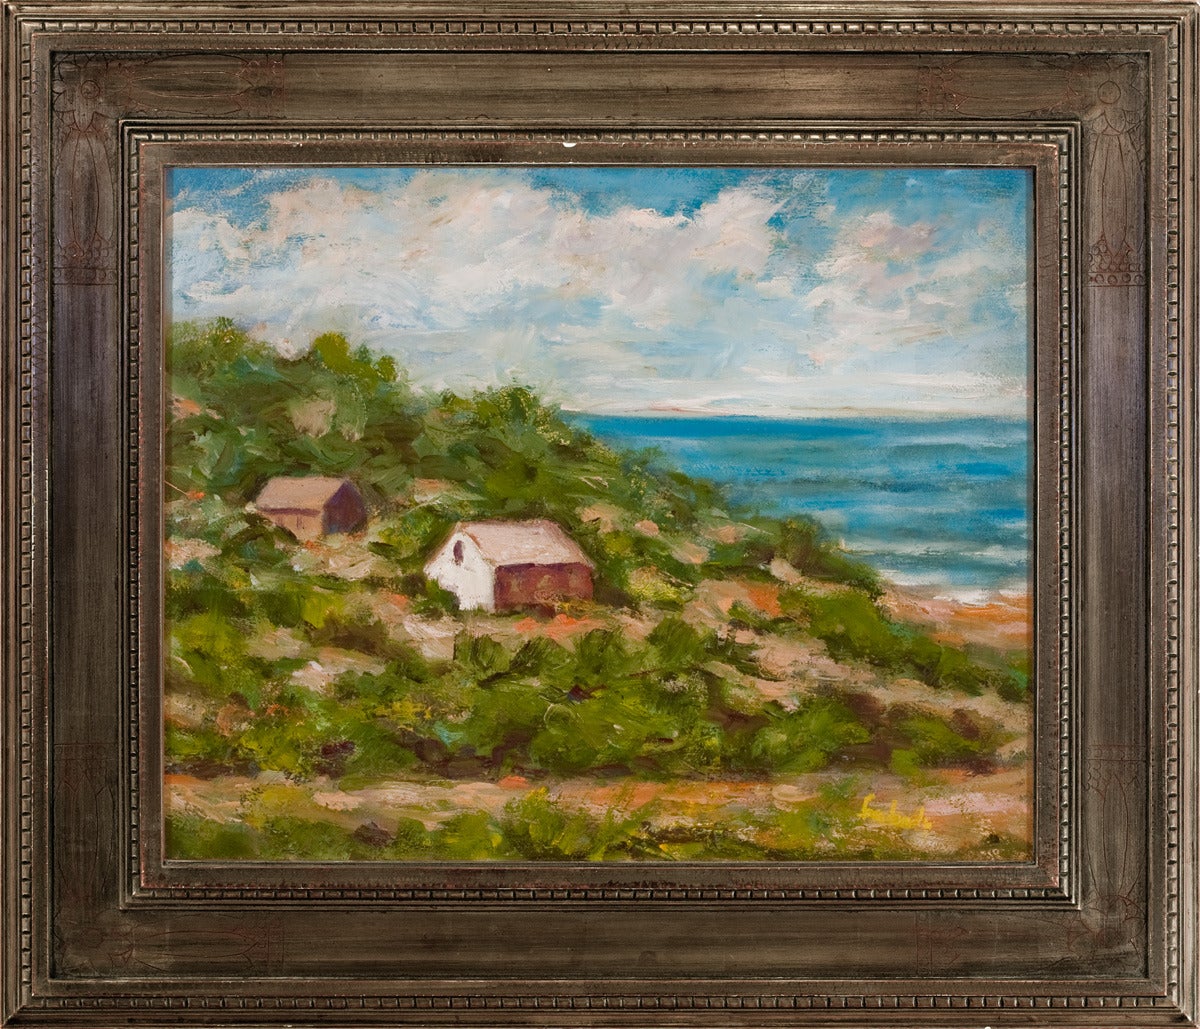 Evelyn Faherty Landscape Painting - "Seaside Cottage"